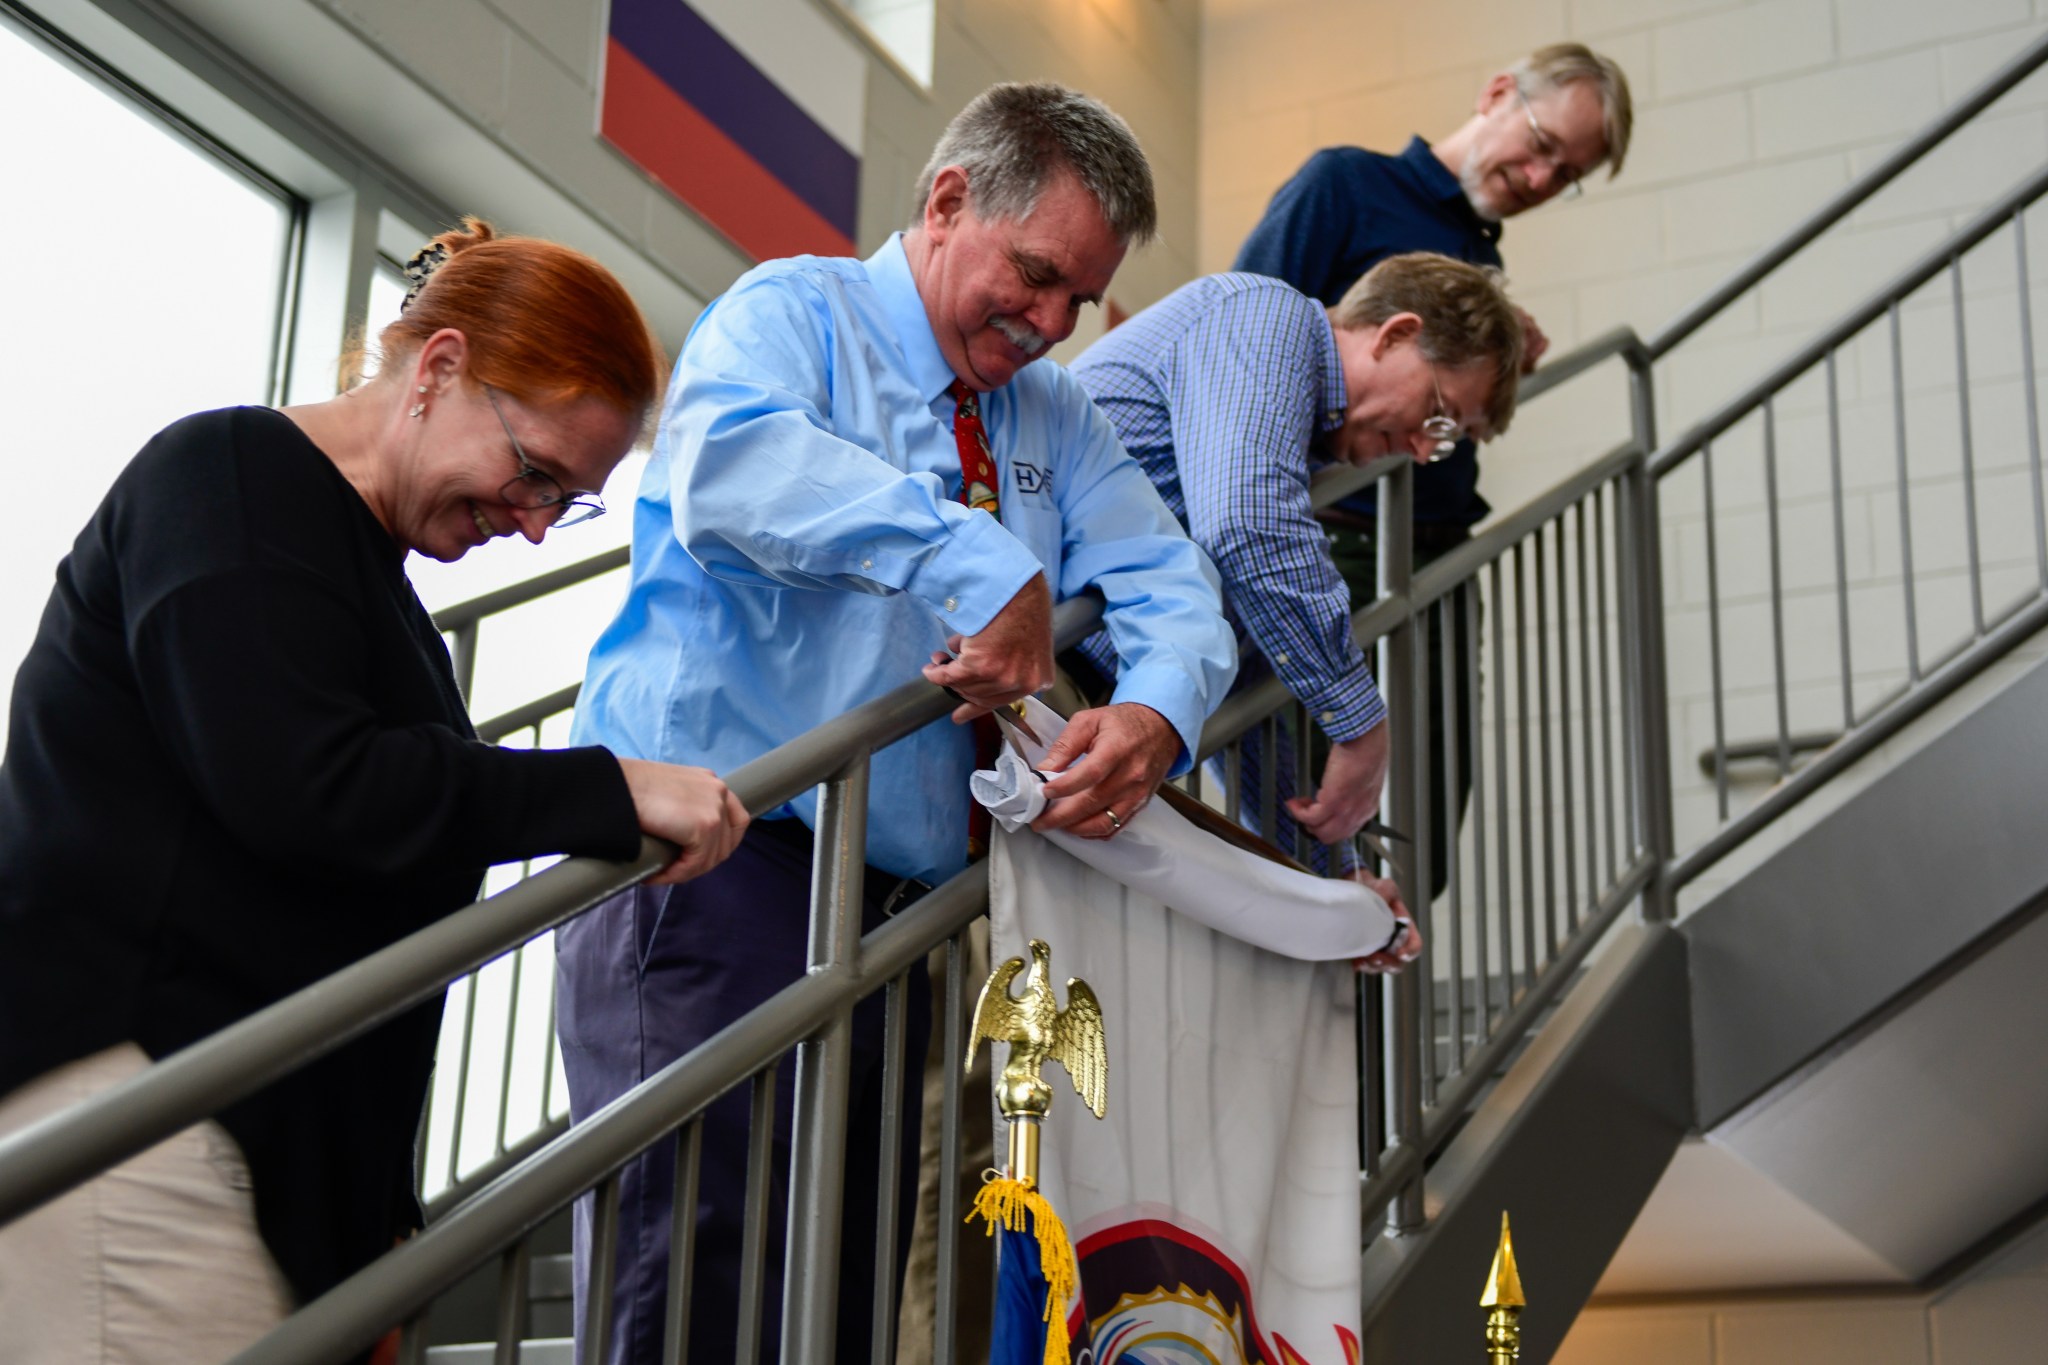 From left, Nicole Pelfrey, manager of Payload and Mission Operations Division; Rick Oelkers, ground systems operations team lead; Eric Earhart, rotordynamics lead; and Dave Gwaltney, technical assistant for the Commercial Crew Program's Launch Vehicle Systems Office special systems, stand on the staircase as Oelkers and Earhart prepare to unveil the Crew-8 mission flag.